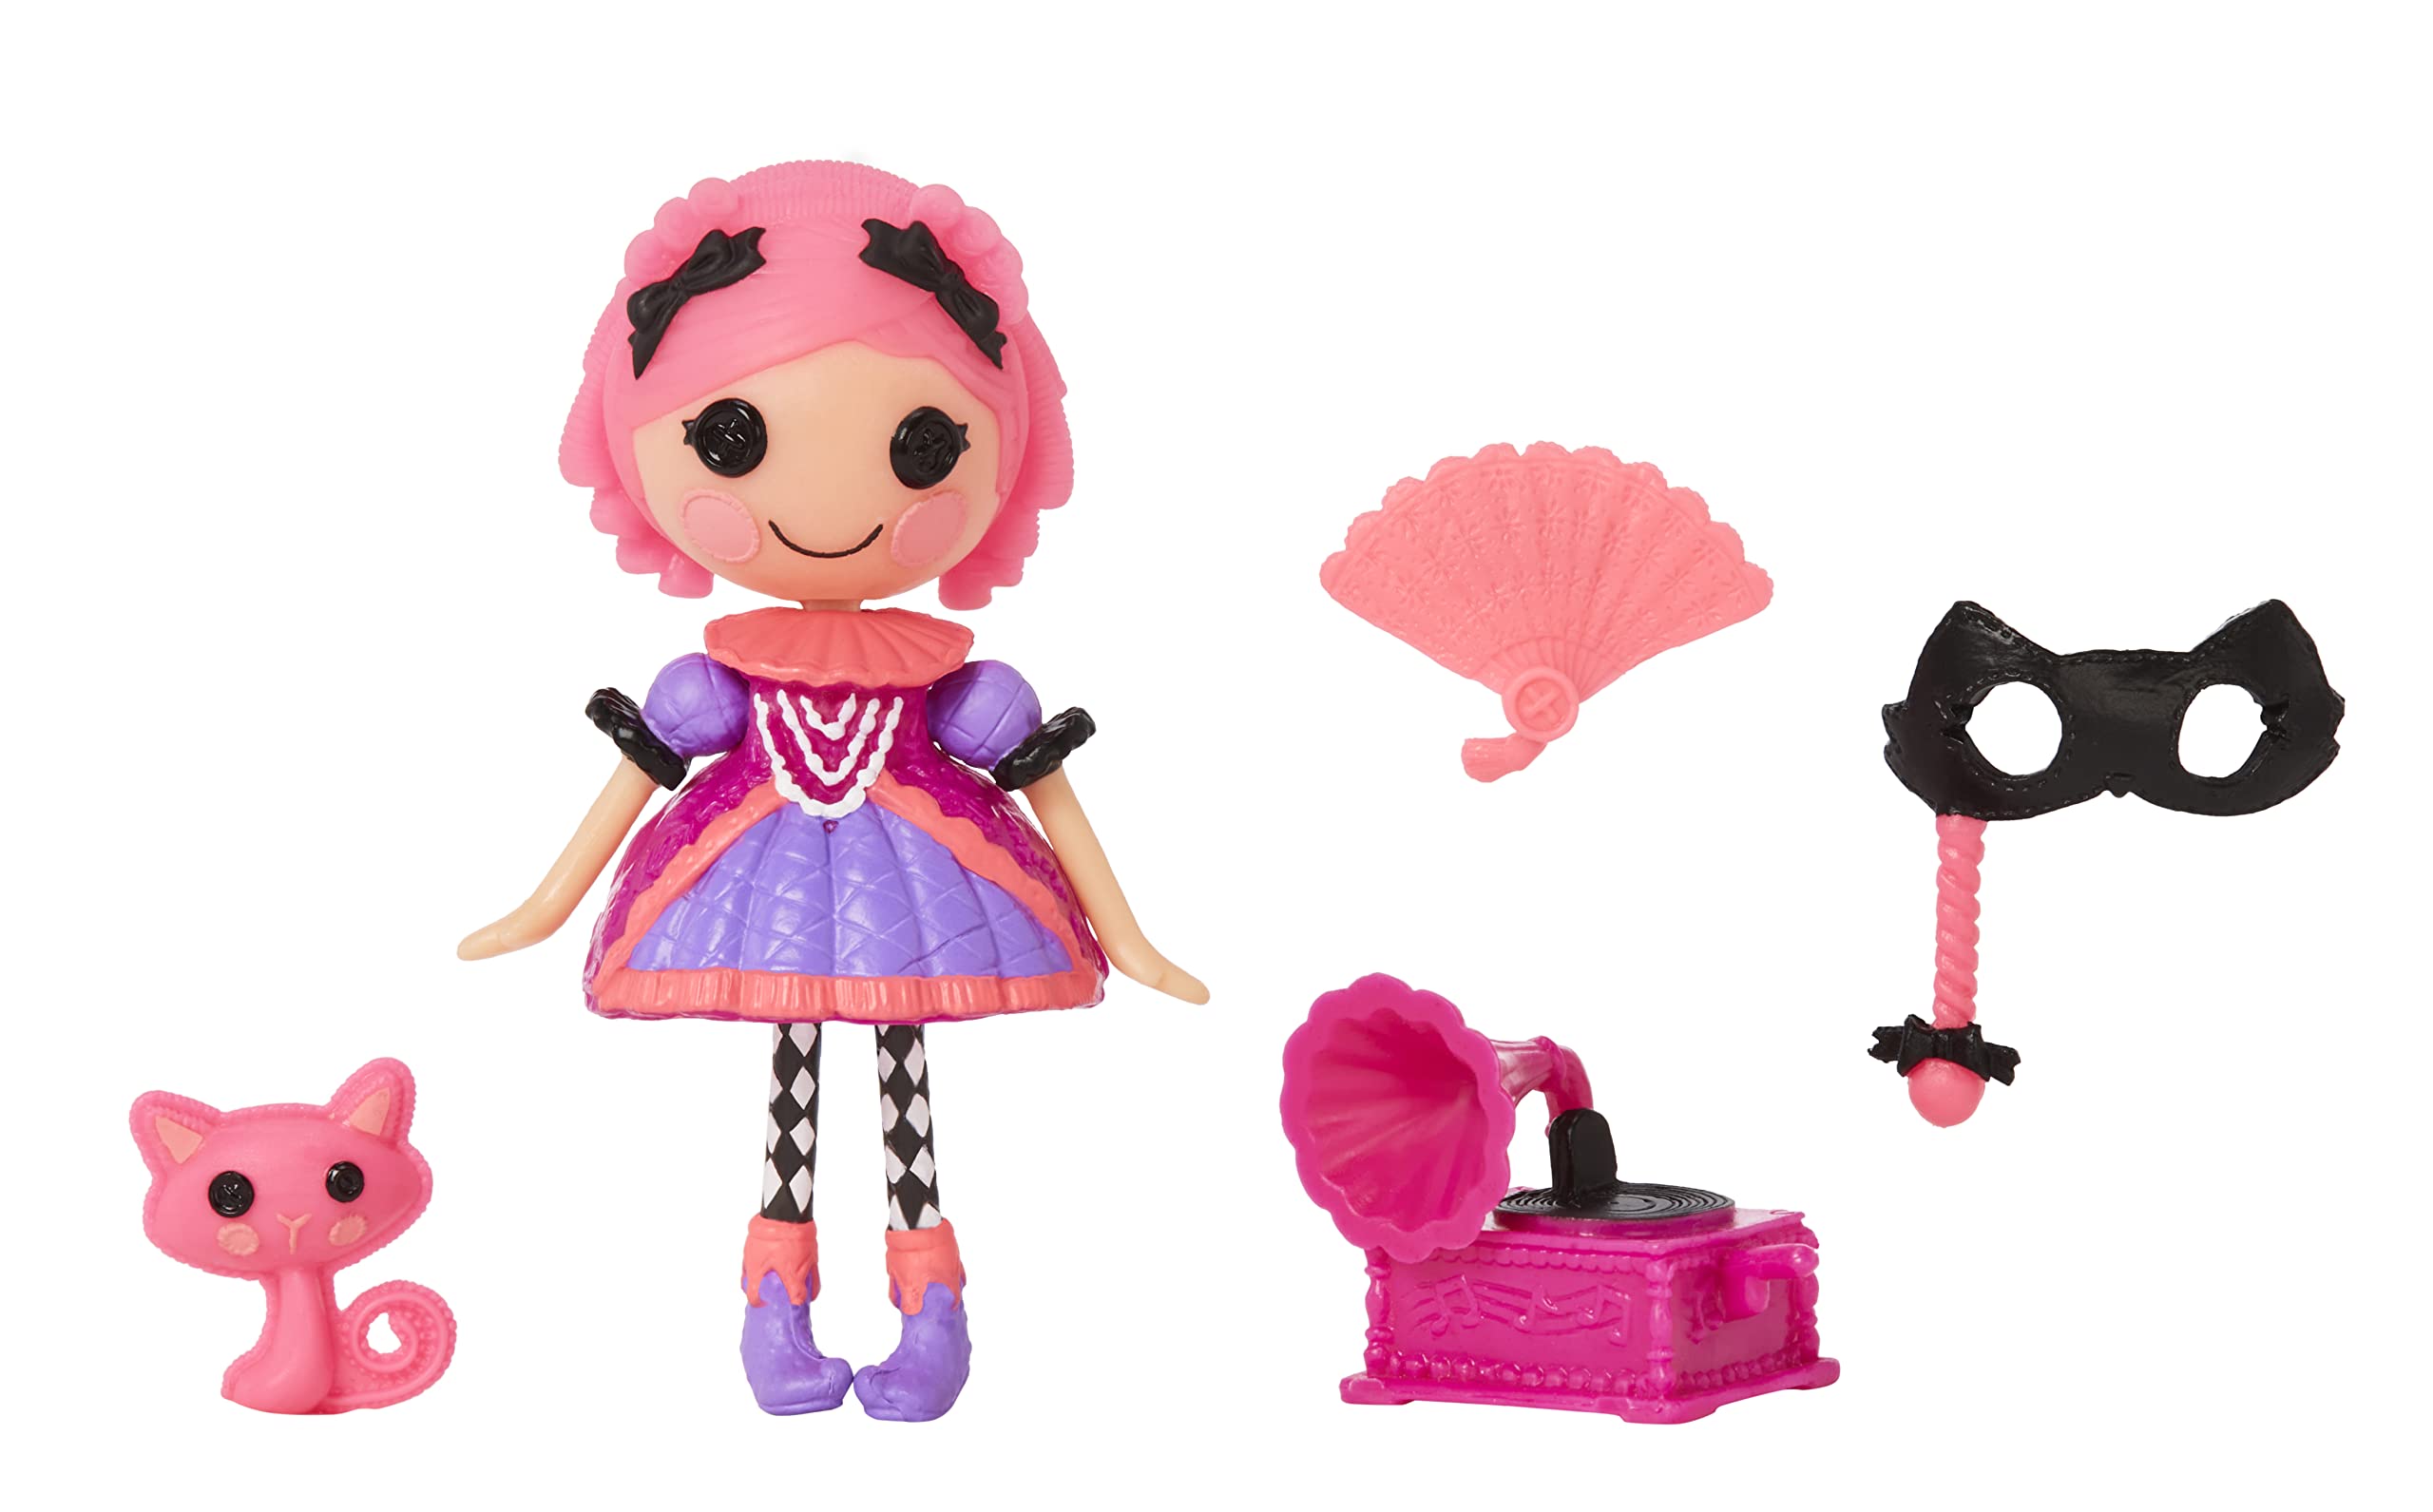 Lalaloopsy Mini TM Doll 2-Pack – Confetti Carnivale + April Sunsplash with Mini Pets Cat & Toucan, two 3” mini dolls with accessories, in reusable house package playset, for Ages 3-103